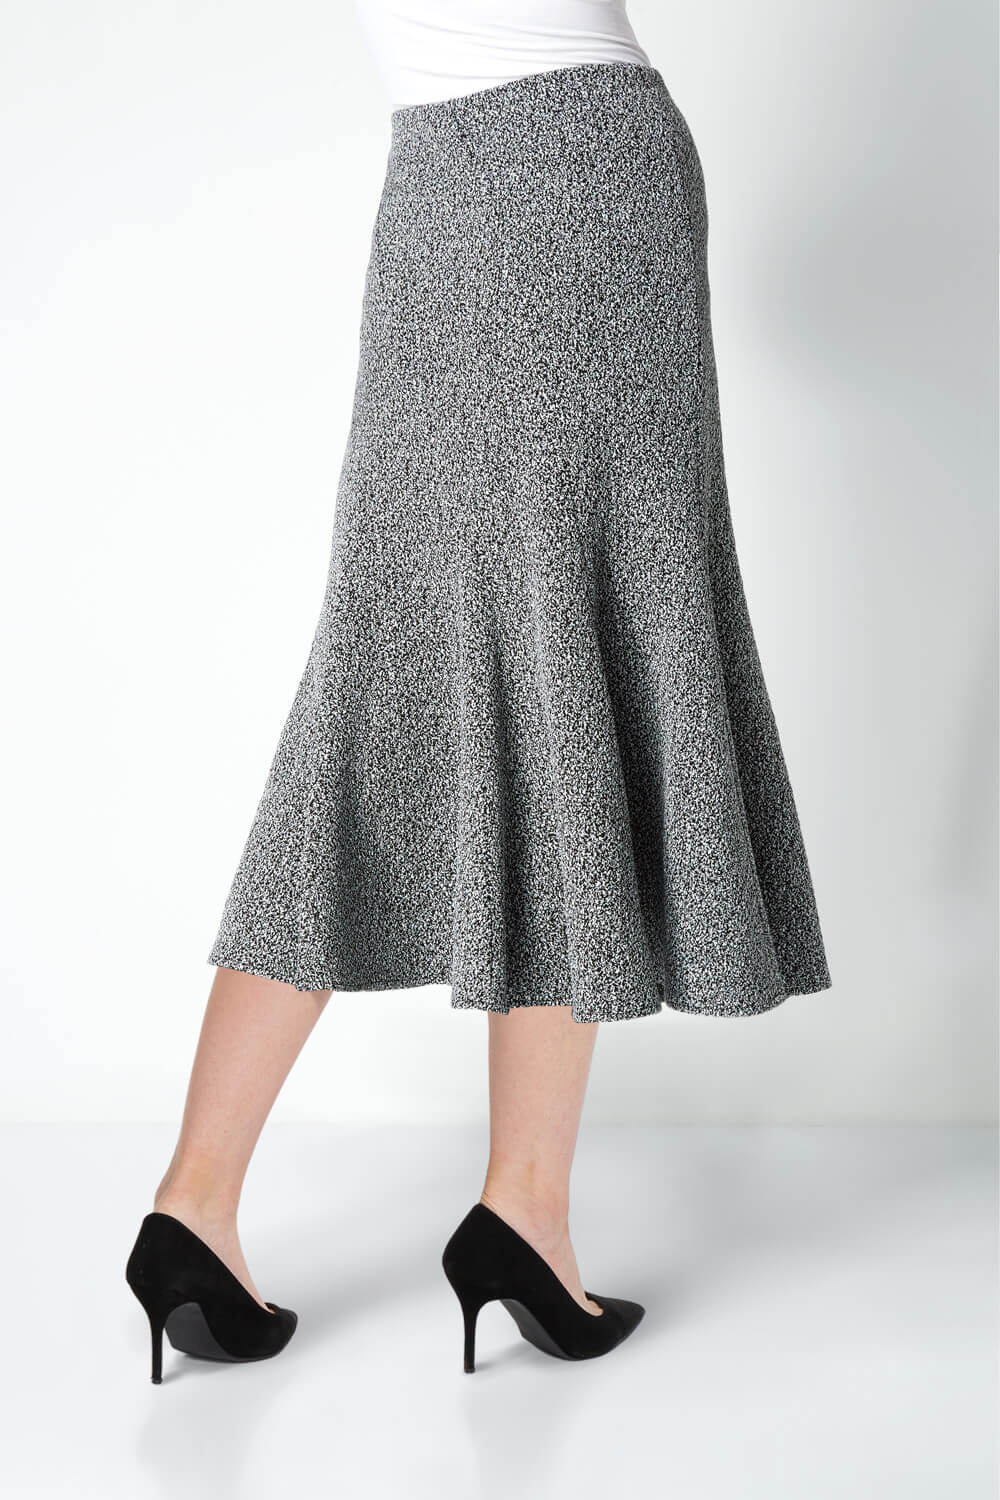 Grey Texture Flared Skirt, Image 2 of 3